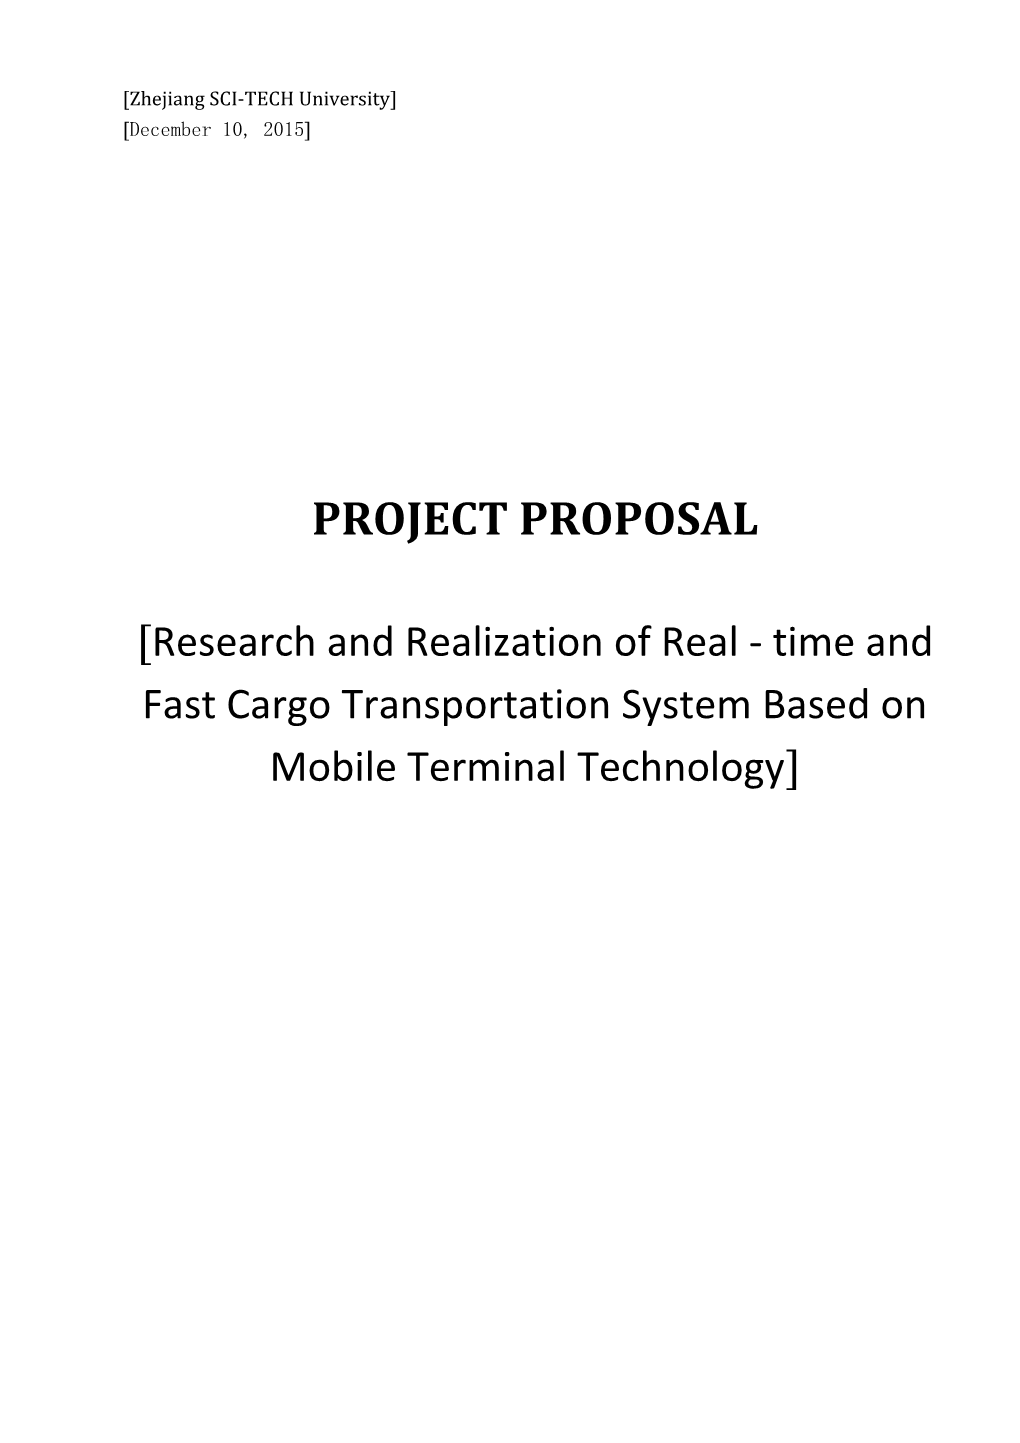 Project Proposal s4